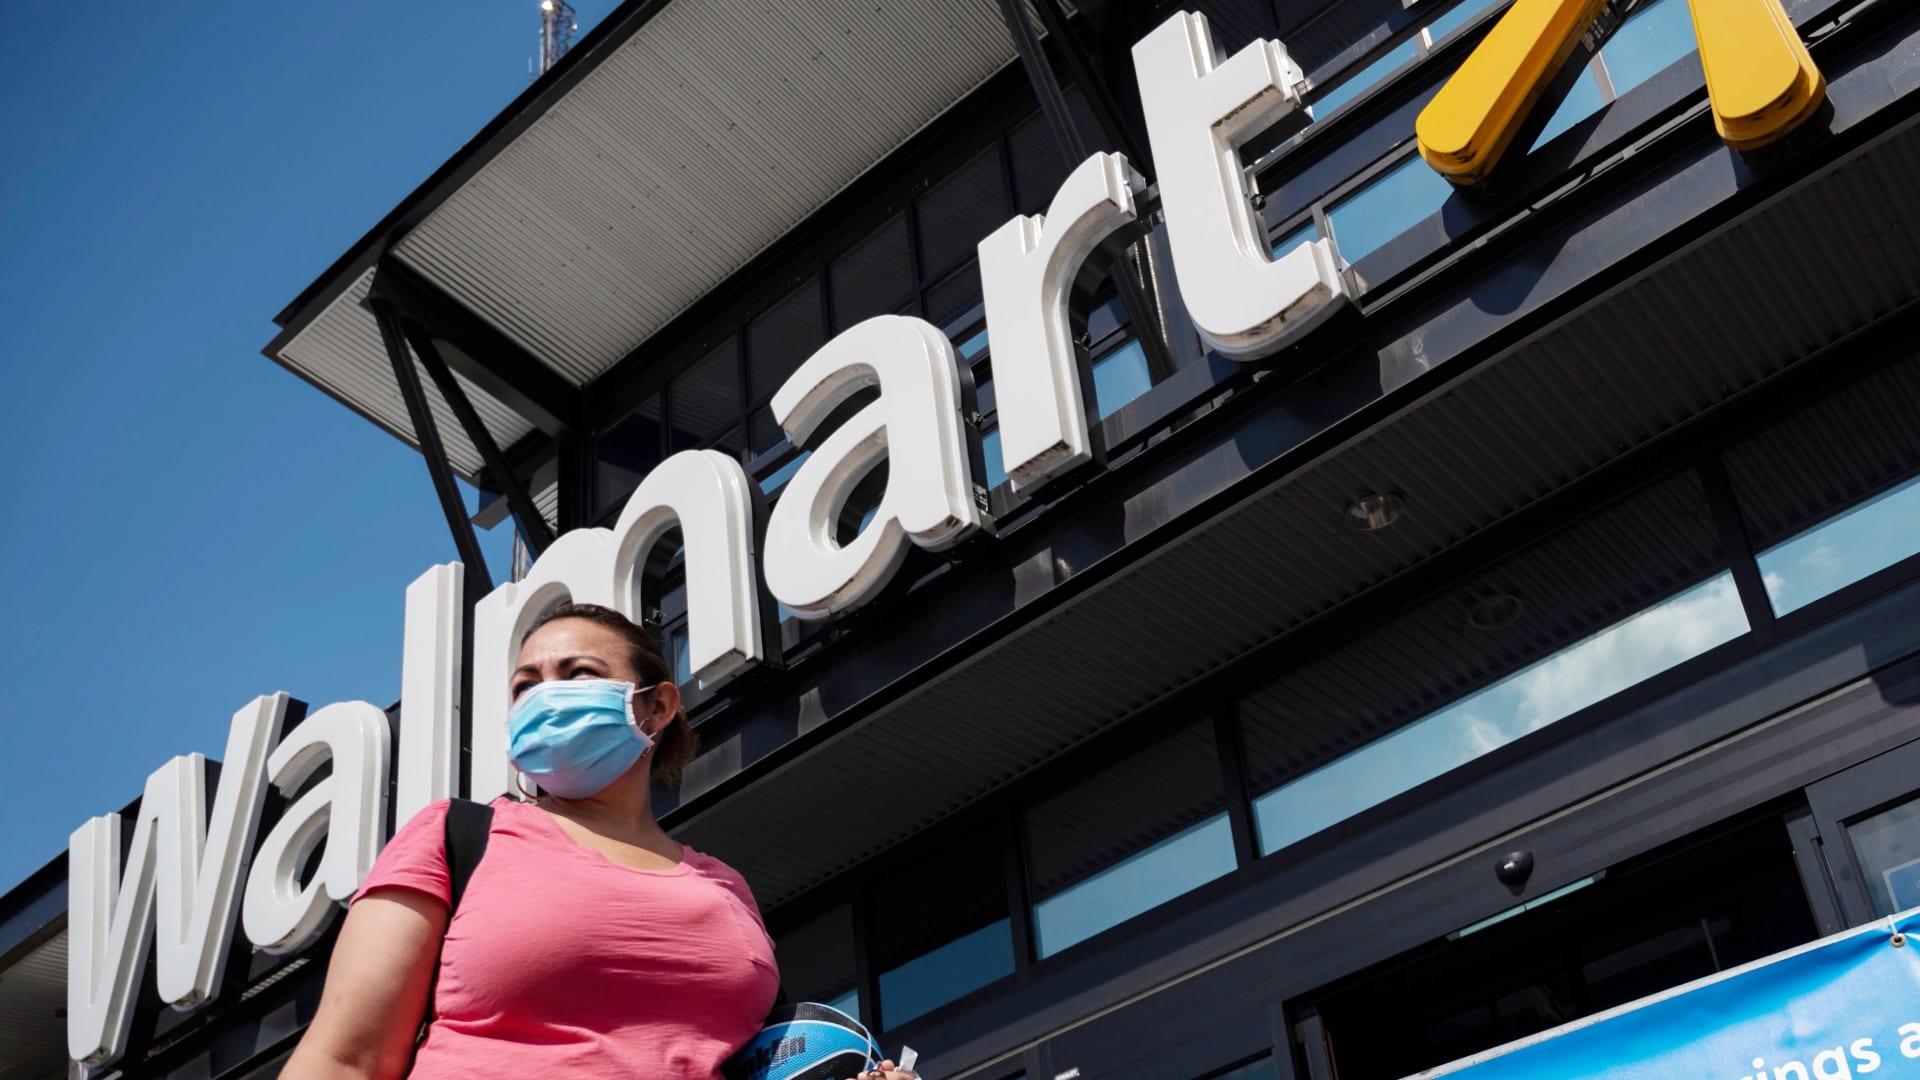 Walmart Just Made a Huge Announcement. Here's the 1 Big Thing It Proves